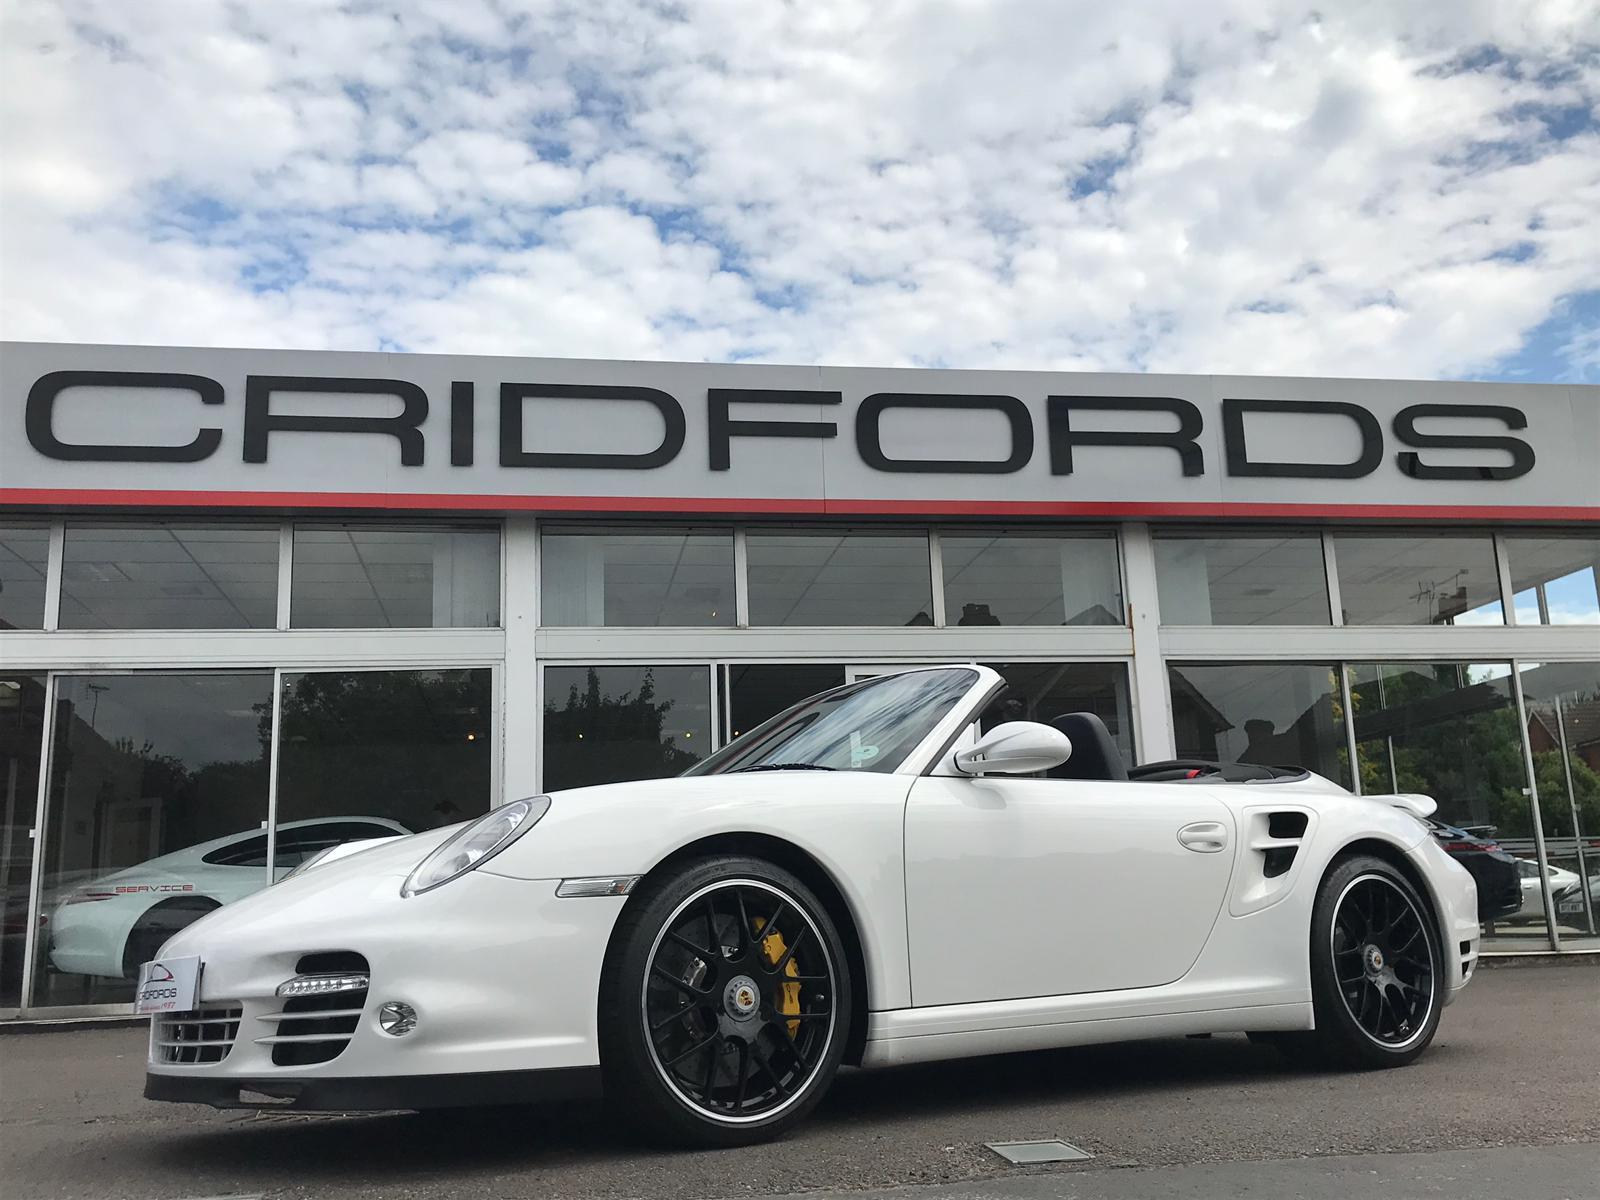 Used Porsche Cars in Surrey and London